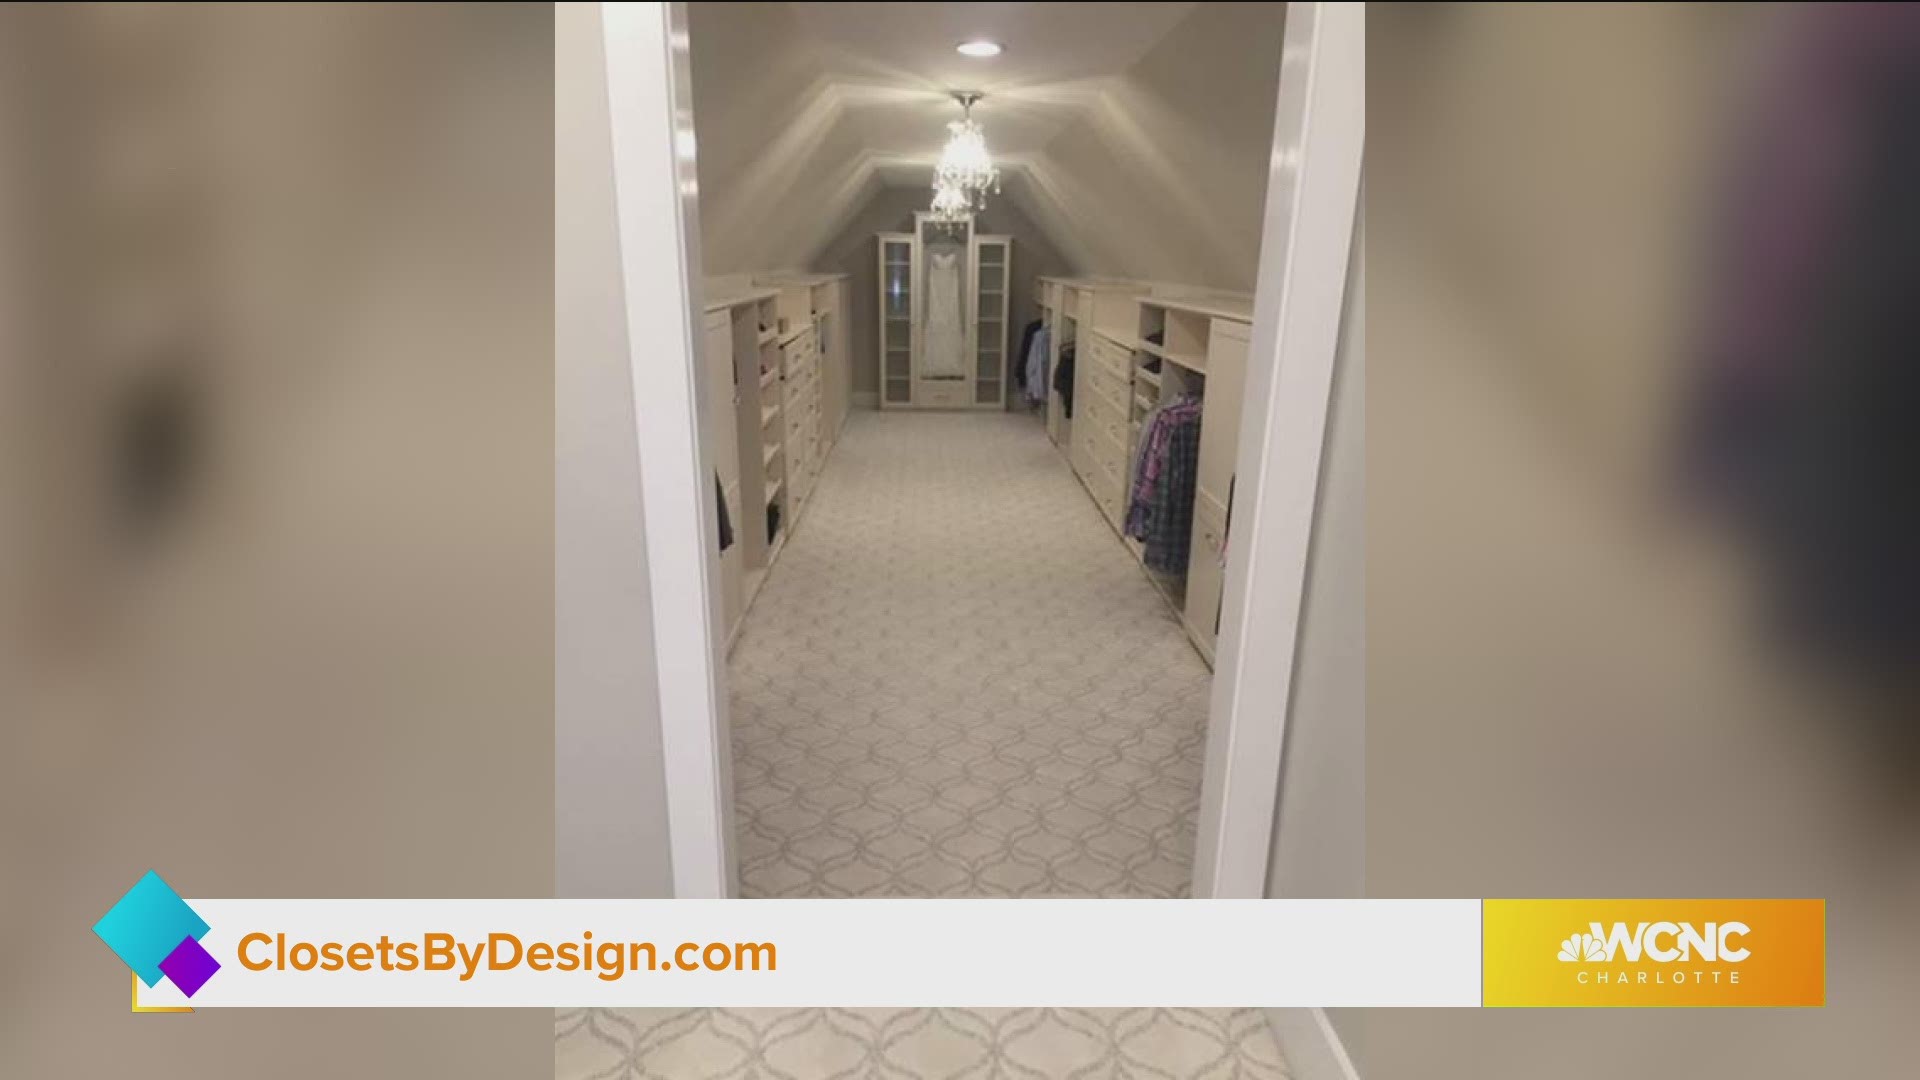 Closets by Design can help you create a functional, fun closet space